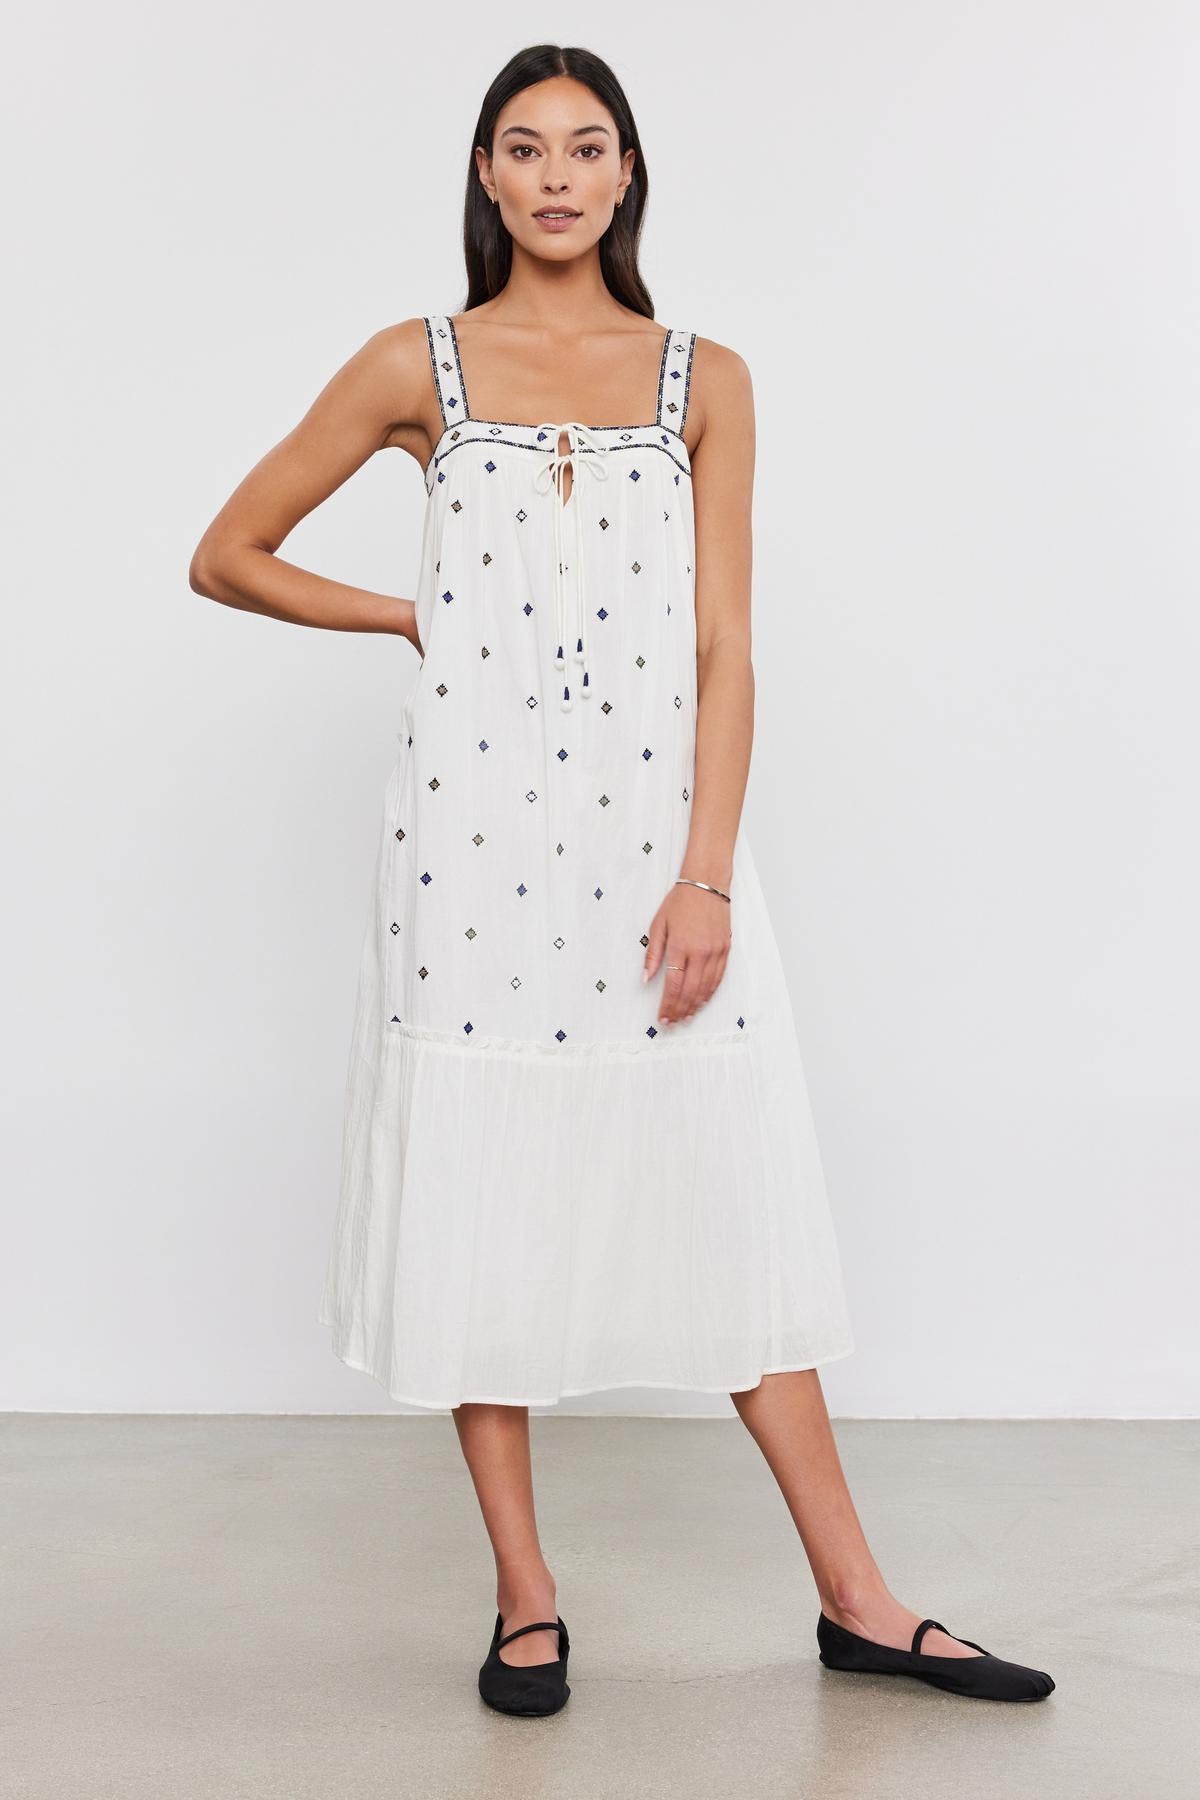 A woman in a white sleeveless Velvet by Graham & Spencer Riley dress with black polka dots and drawstring neckline, paired with black flat shoes, standing against a plain background.-36752942137537